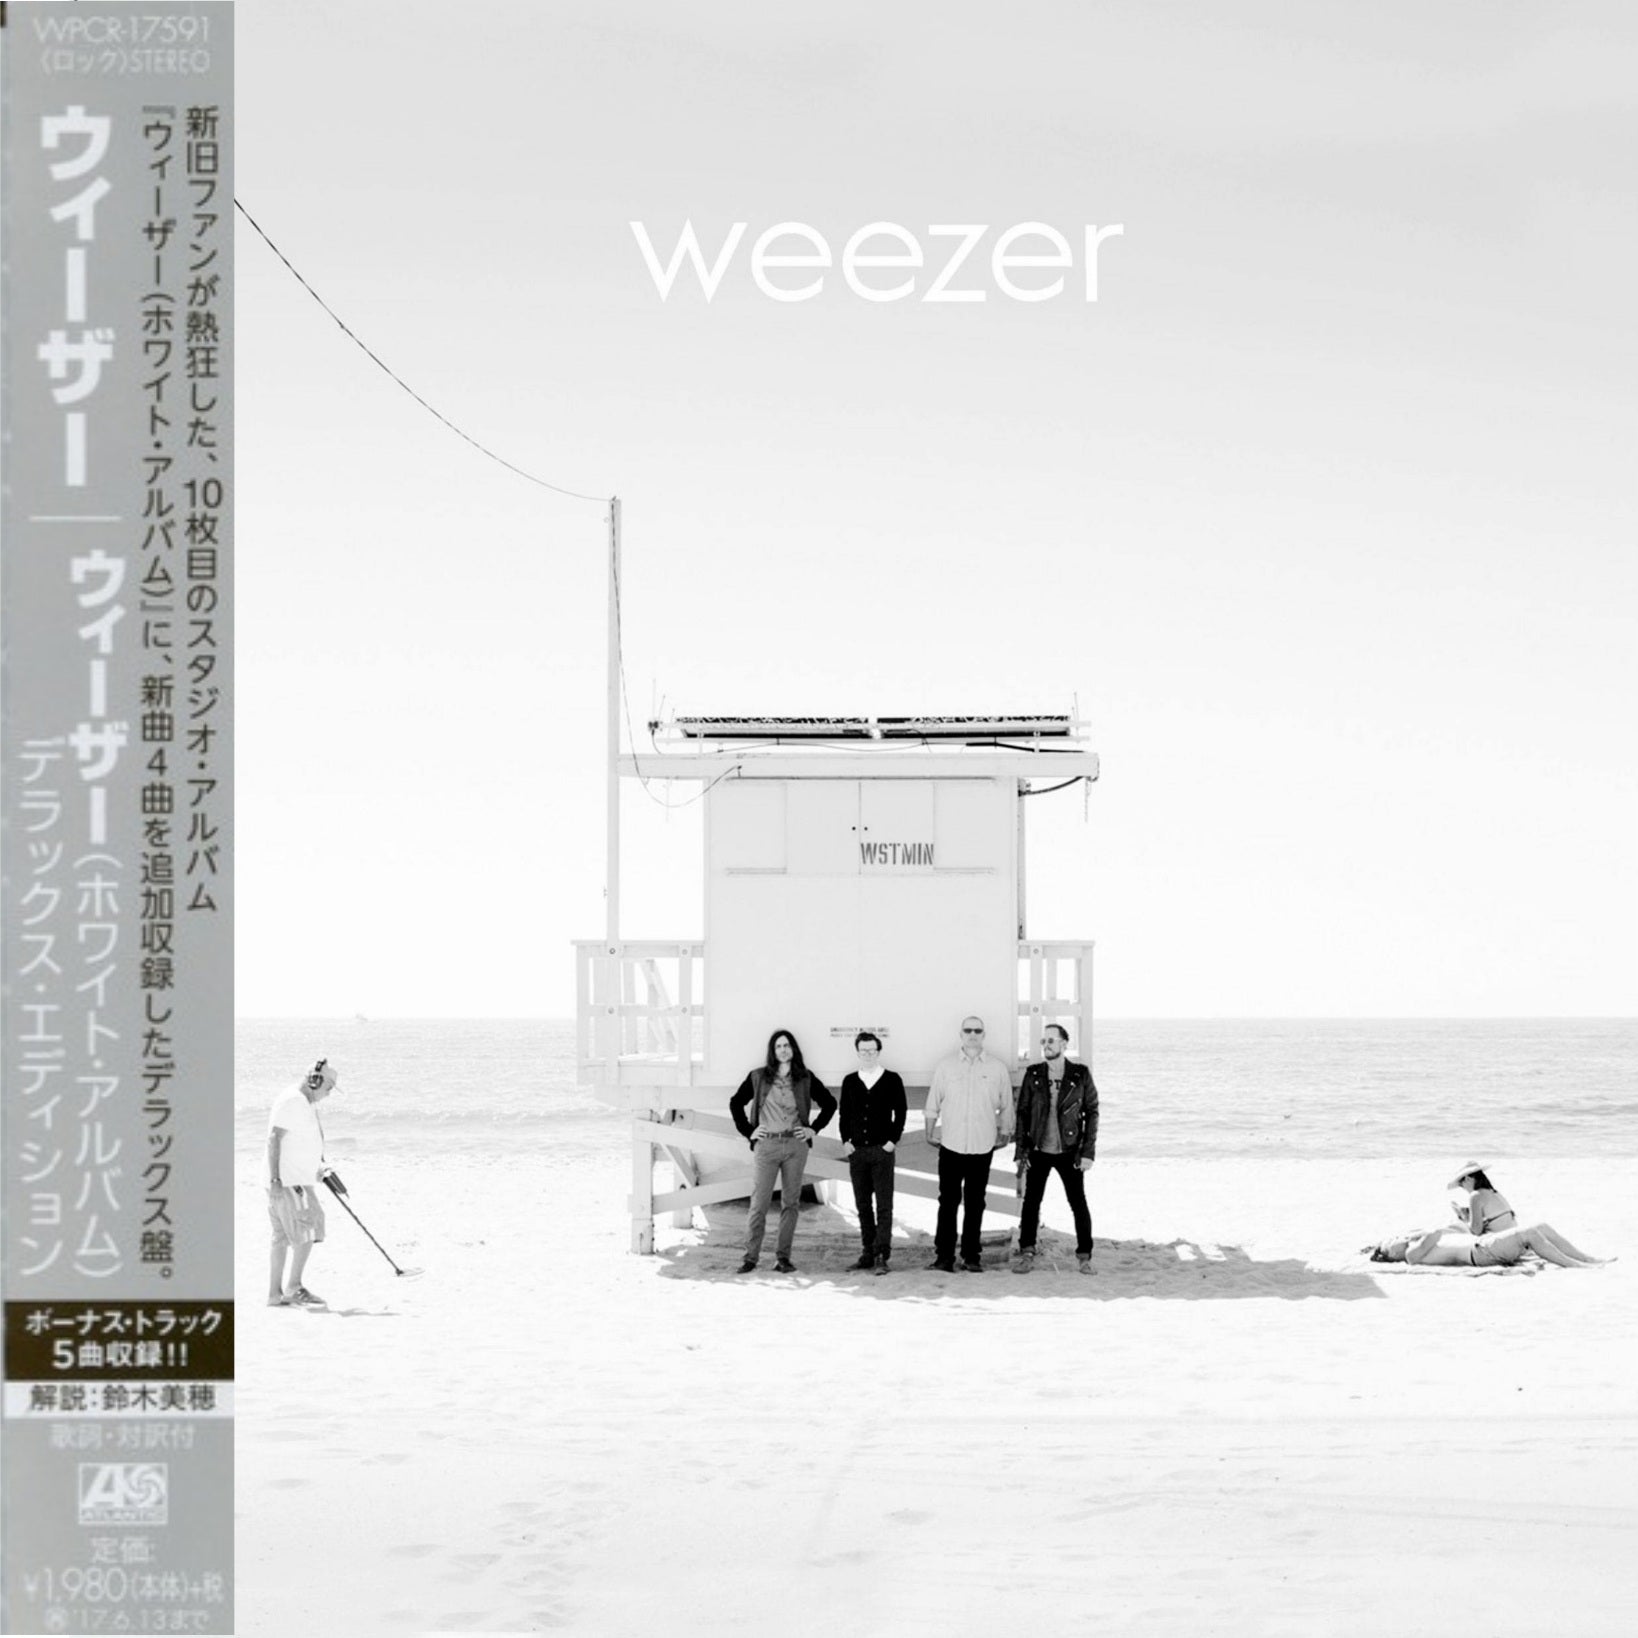 Weezer: White Album - Japanese Deluxe Edition CD with Obi Strip